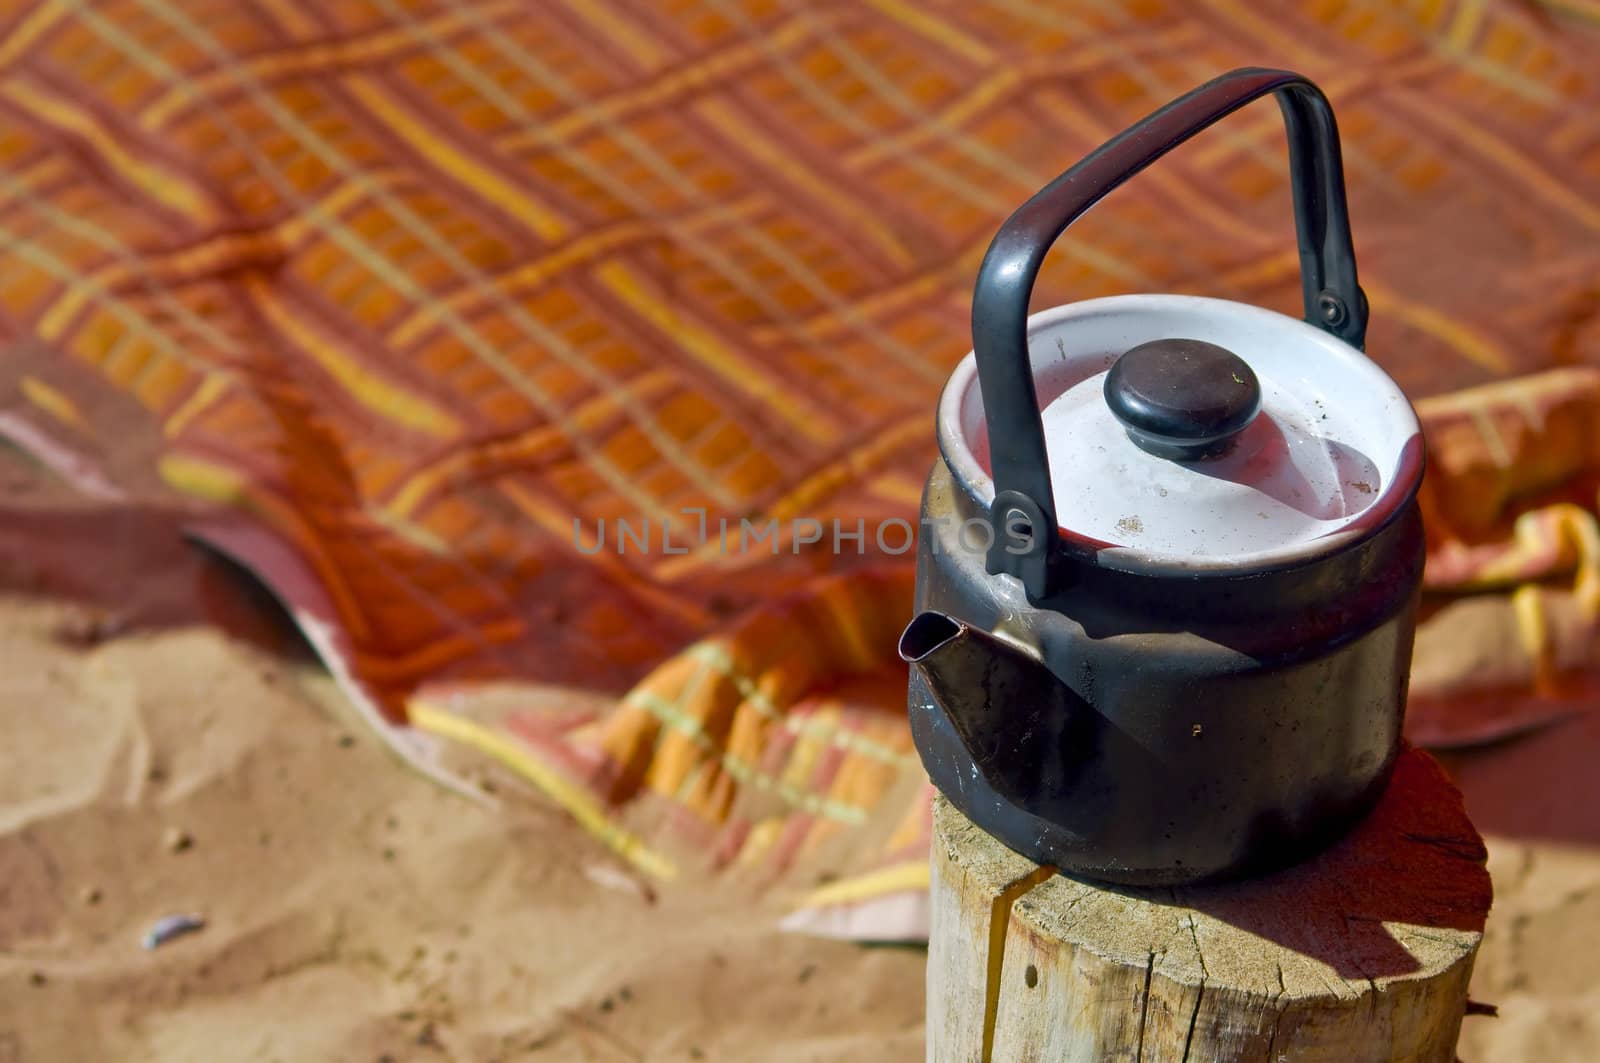 Sooty teapot is on the stump against the backdrop of colorful blankets on the beach. Summer, shallow depth of field.